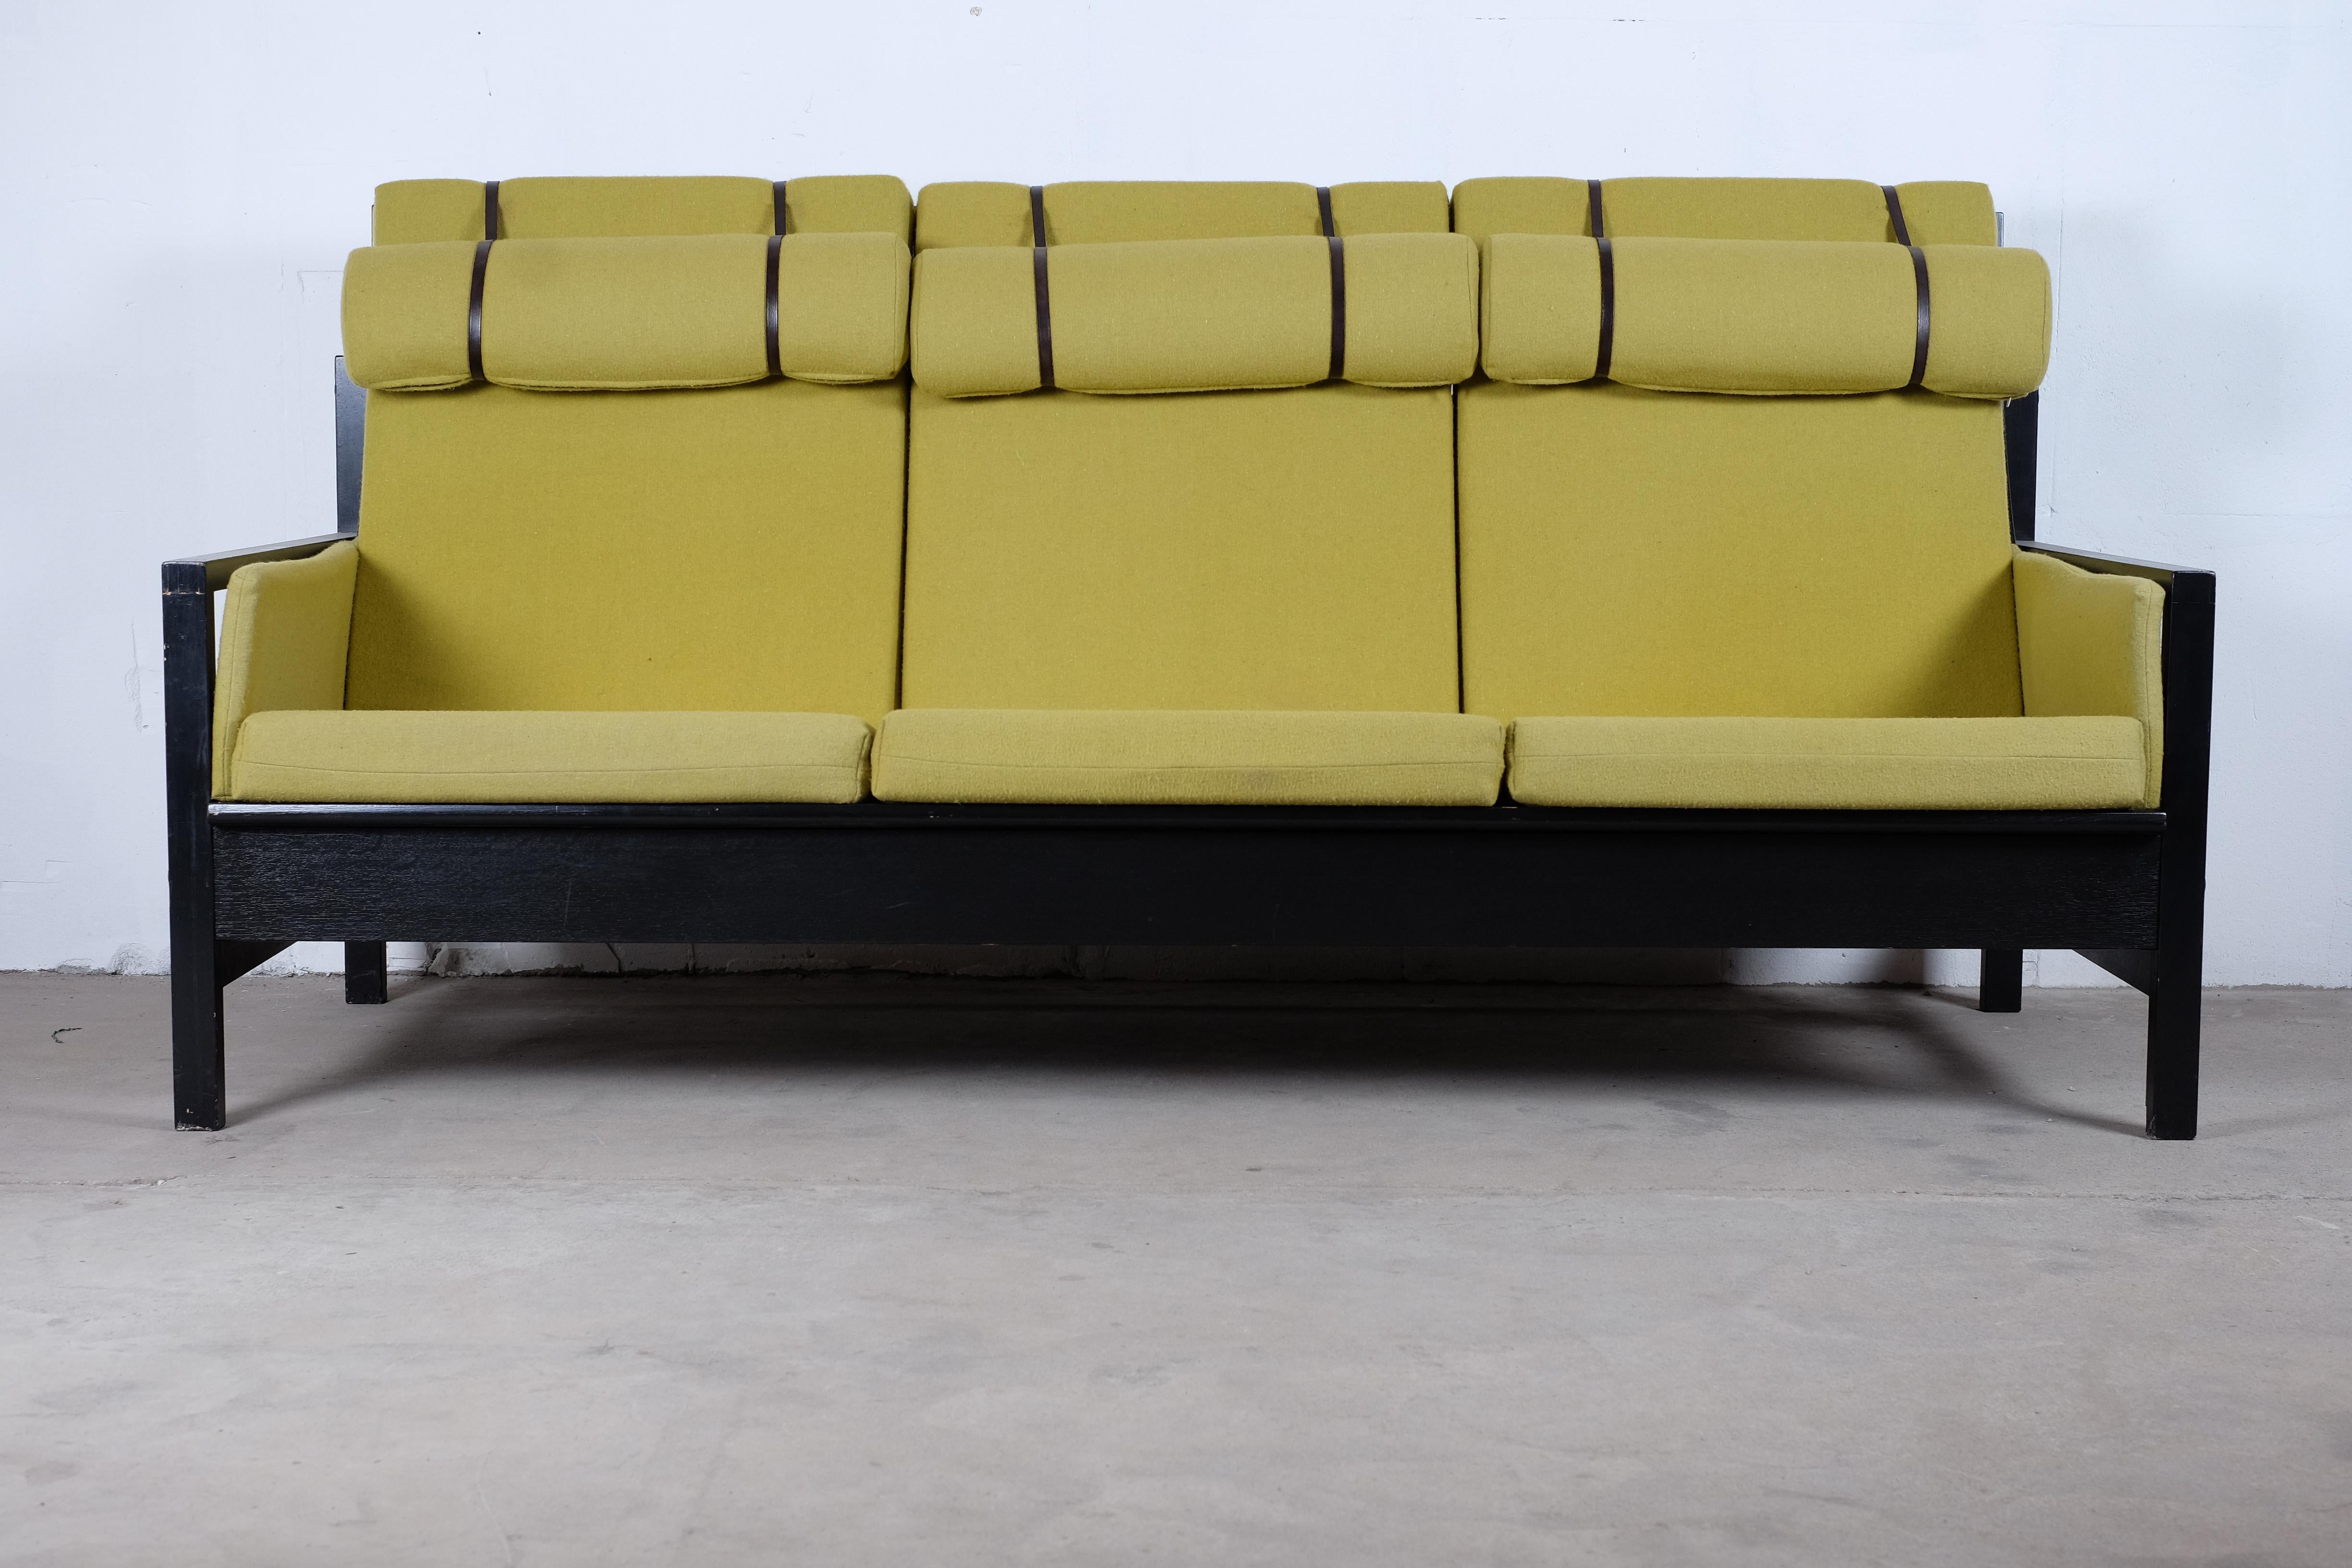 Børge Mogensen 'Slædesofa' in black painted oak and with light green wool cushions.
One of Børge Mogensen's many timeless designs. Great seating comfort and very spacious.

The sofa is in good condition with few signs of use.




 